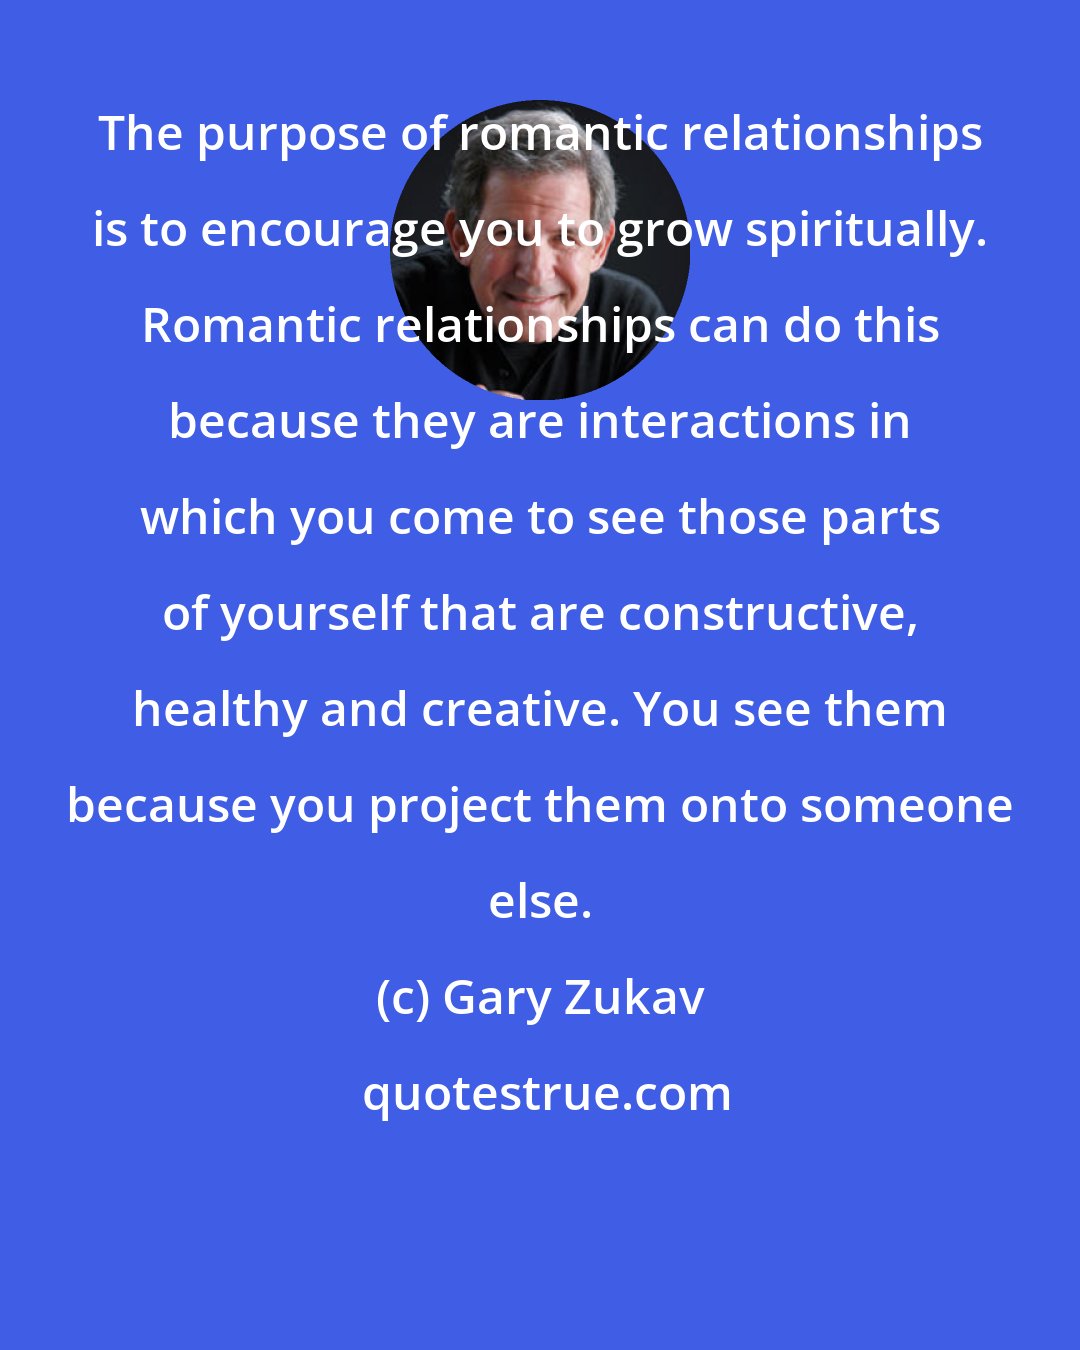 Gary Zukav: The purpose of romantic relationships is to encourage you to grow spiritually. Romantic relationships can do this because they are interactions in which you come to see those parts of yourself that are constructive, healthy and creative. You see them because you project them onto someone else.